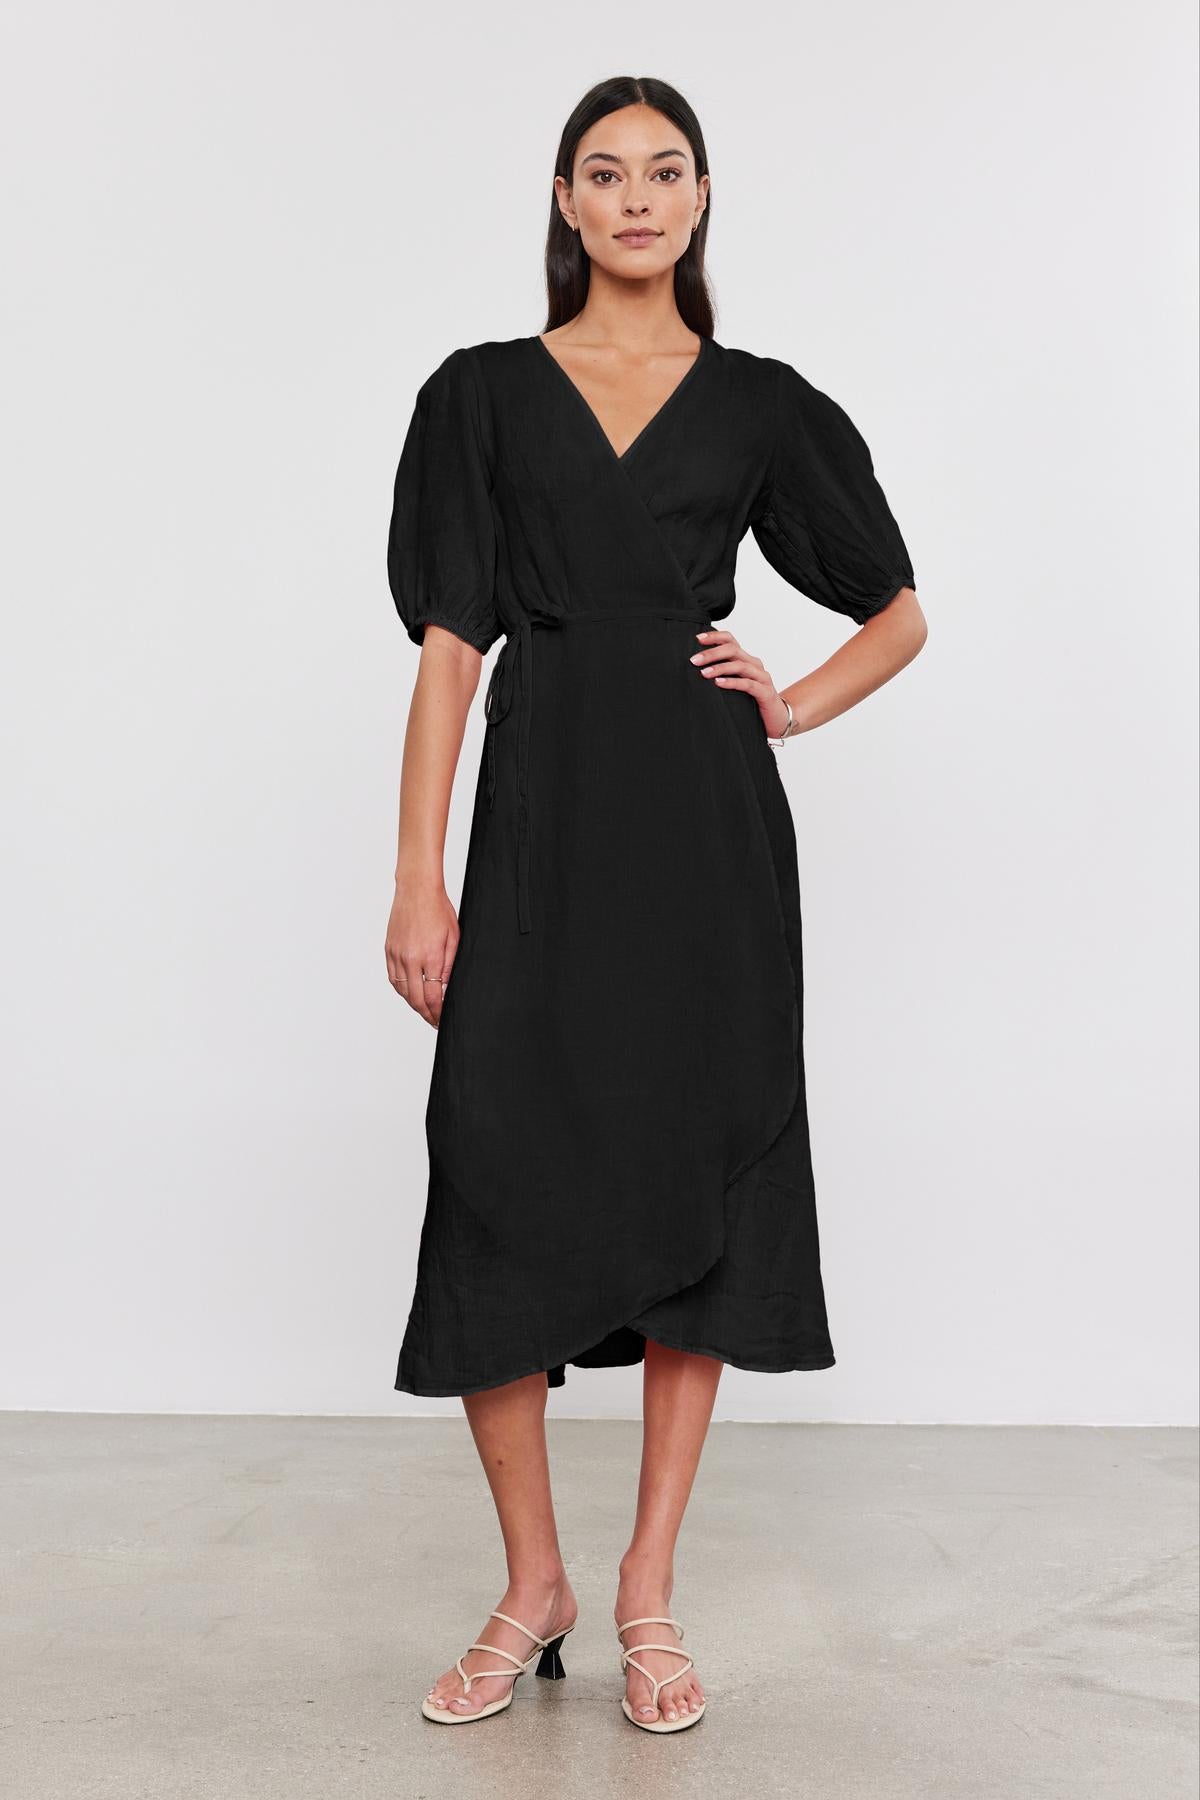 Woman standing in a studio, wearing a black Velvet by Graham & Spencer Dalene Linen Dress with puff sleeves and heeled sandals, posing for the camera.-36917057847489